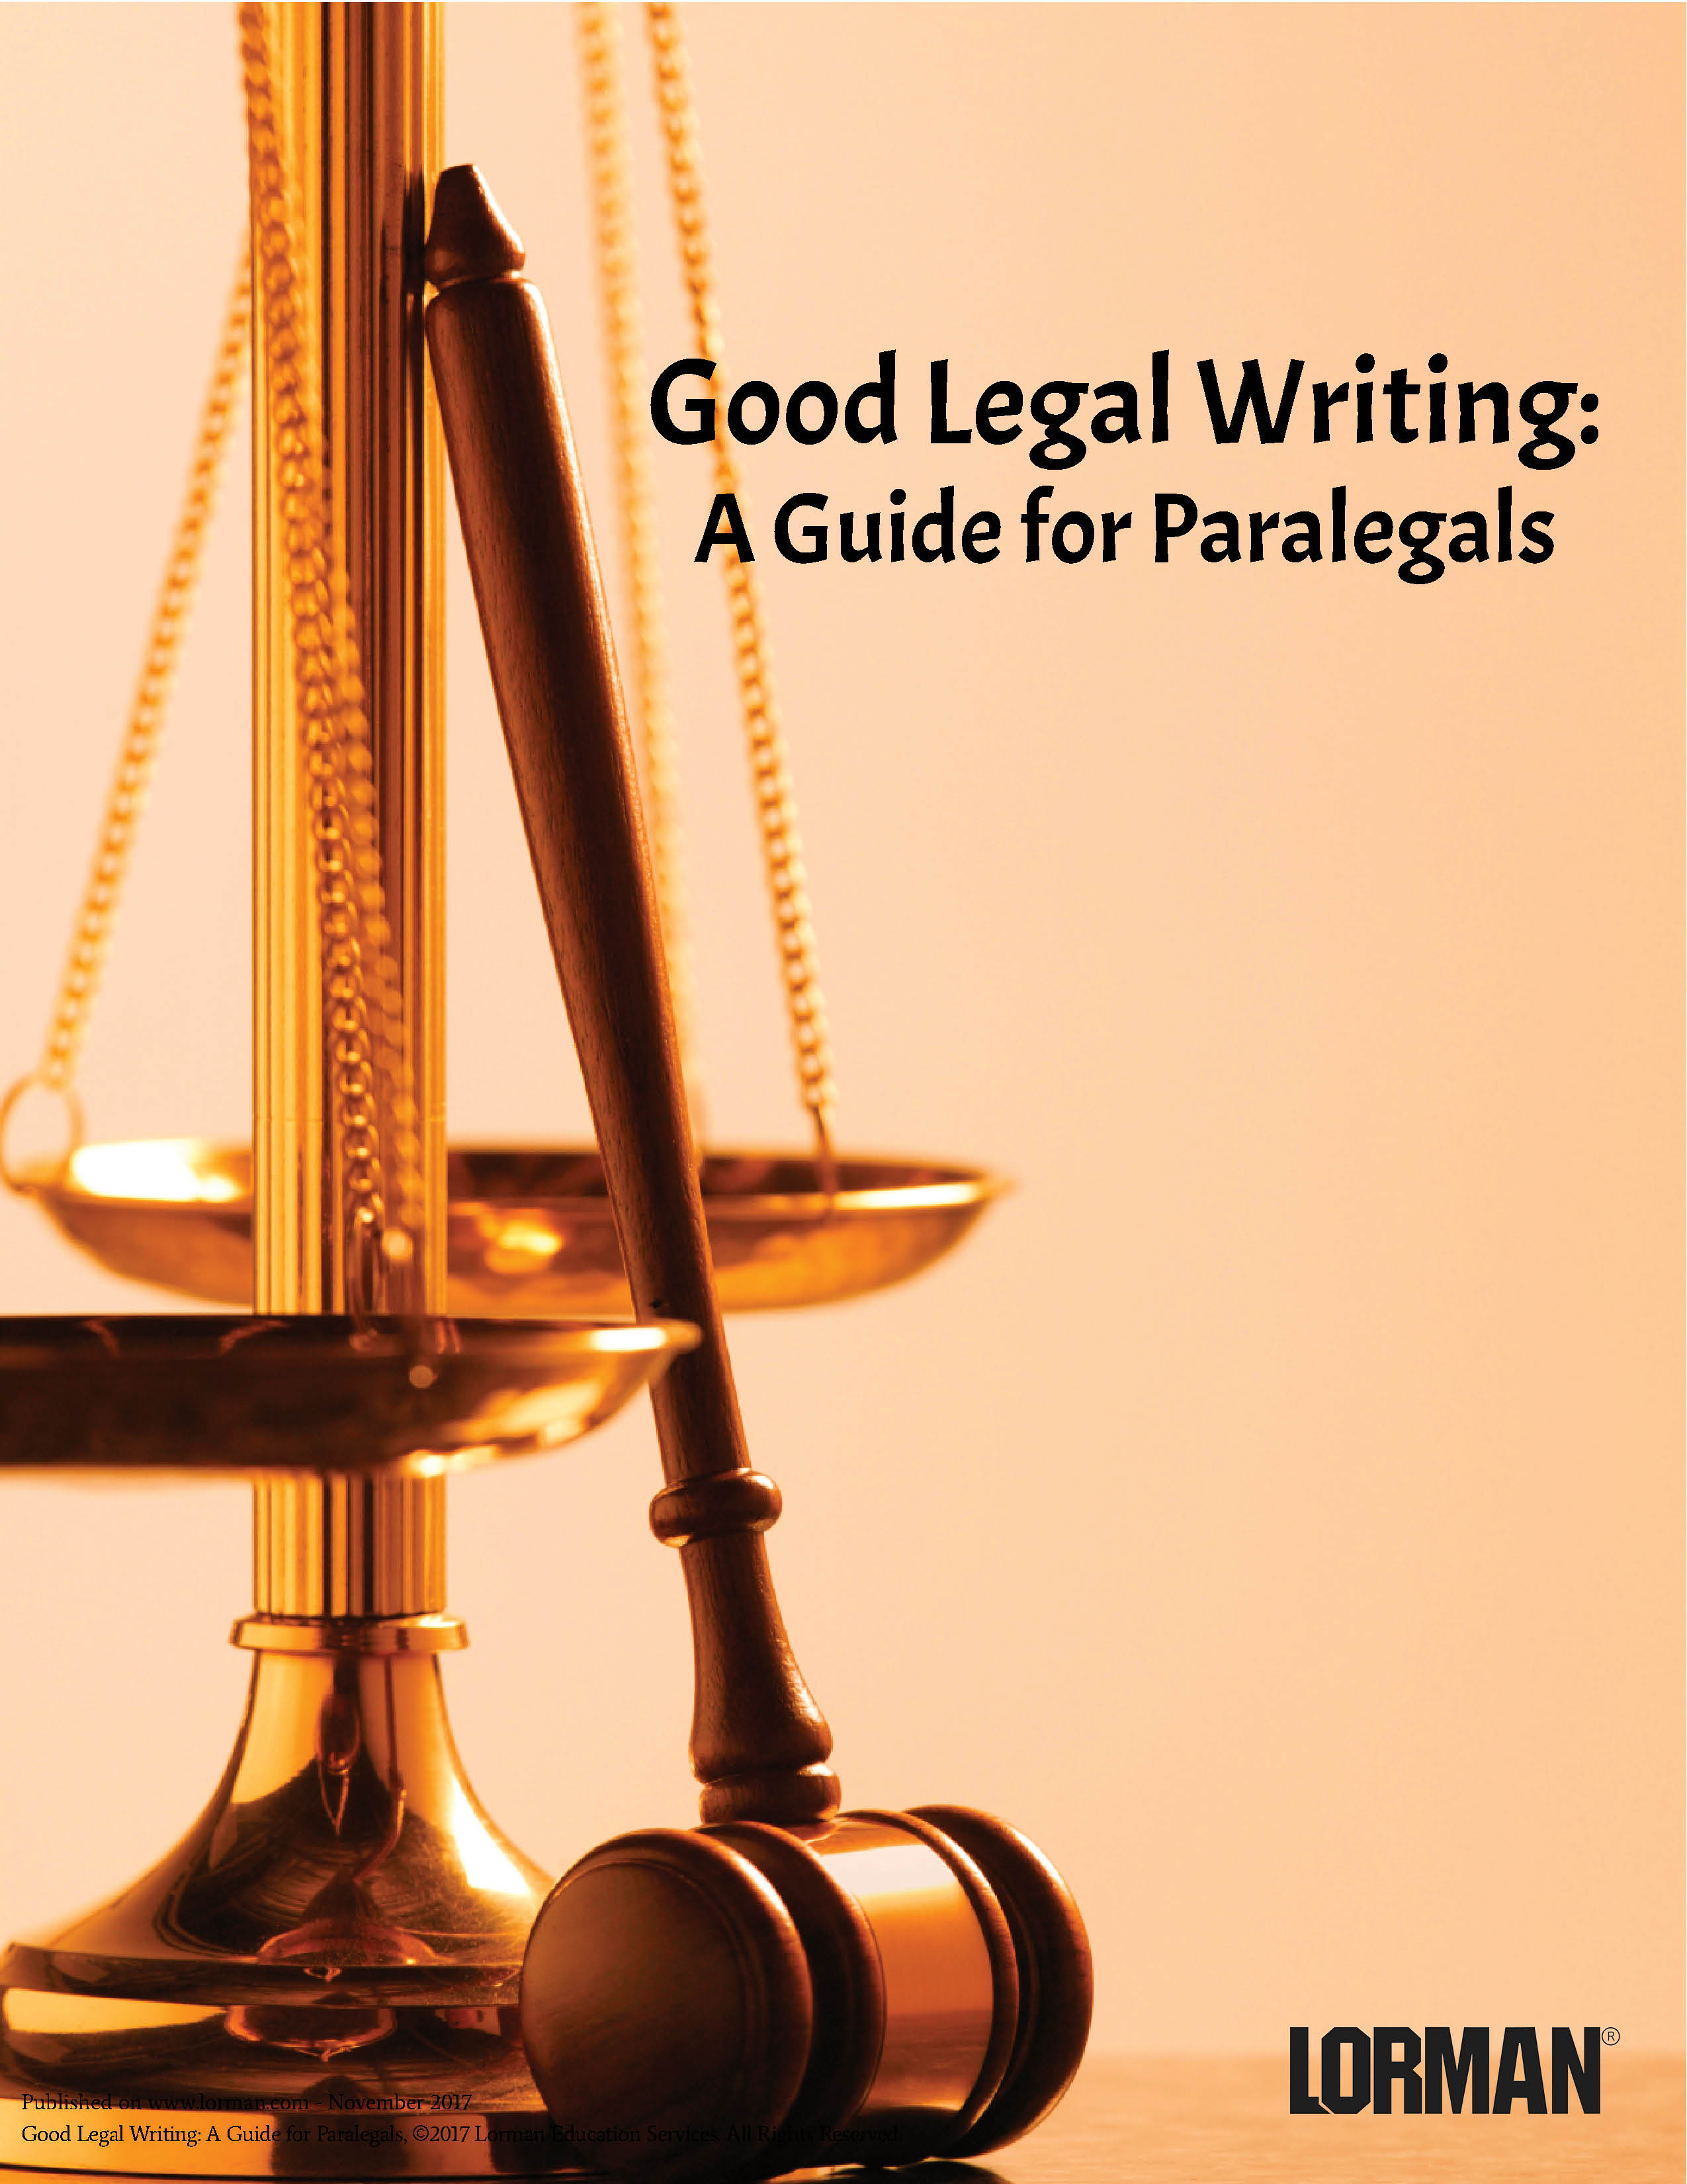 Good Legal Writing: A Guide for Paralegals